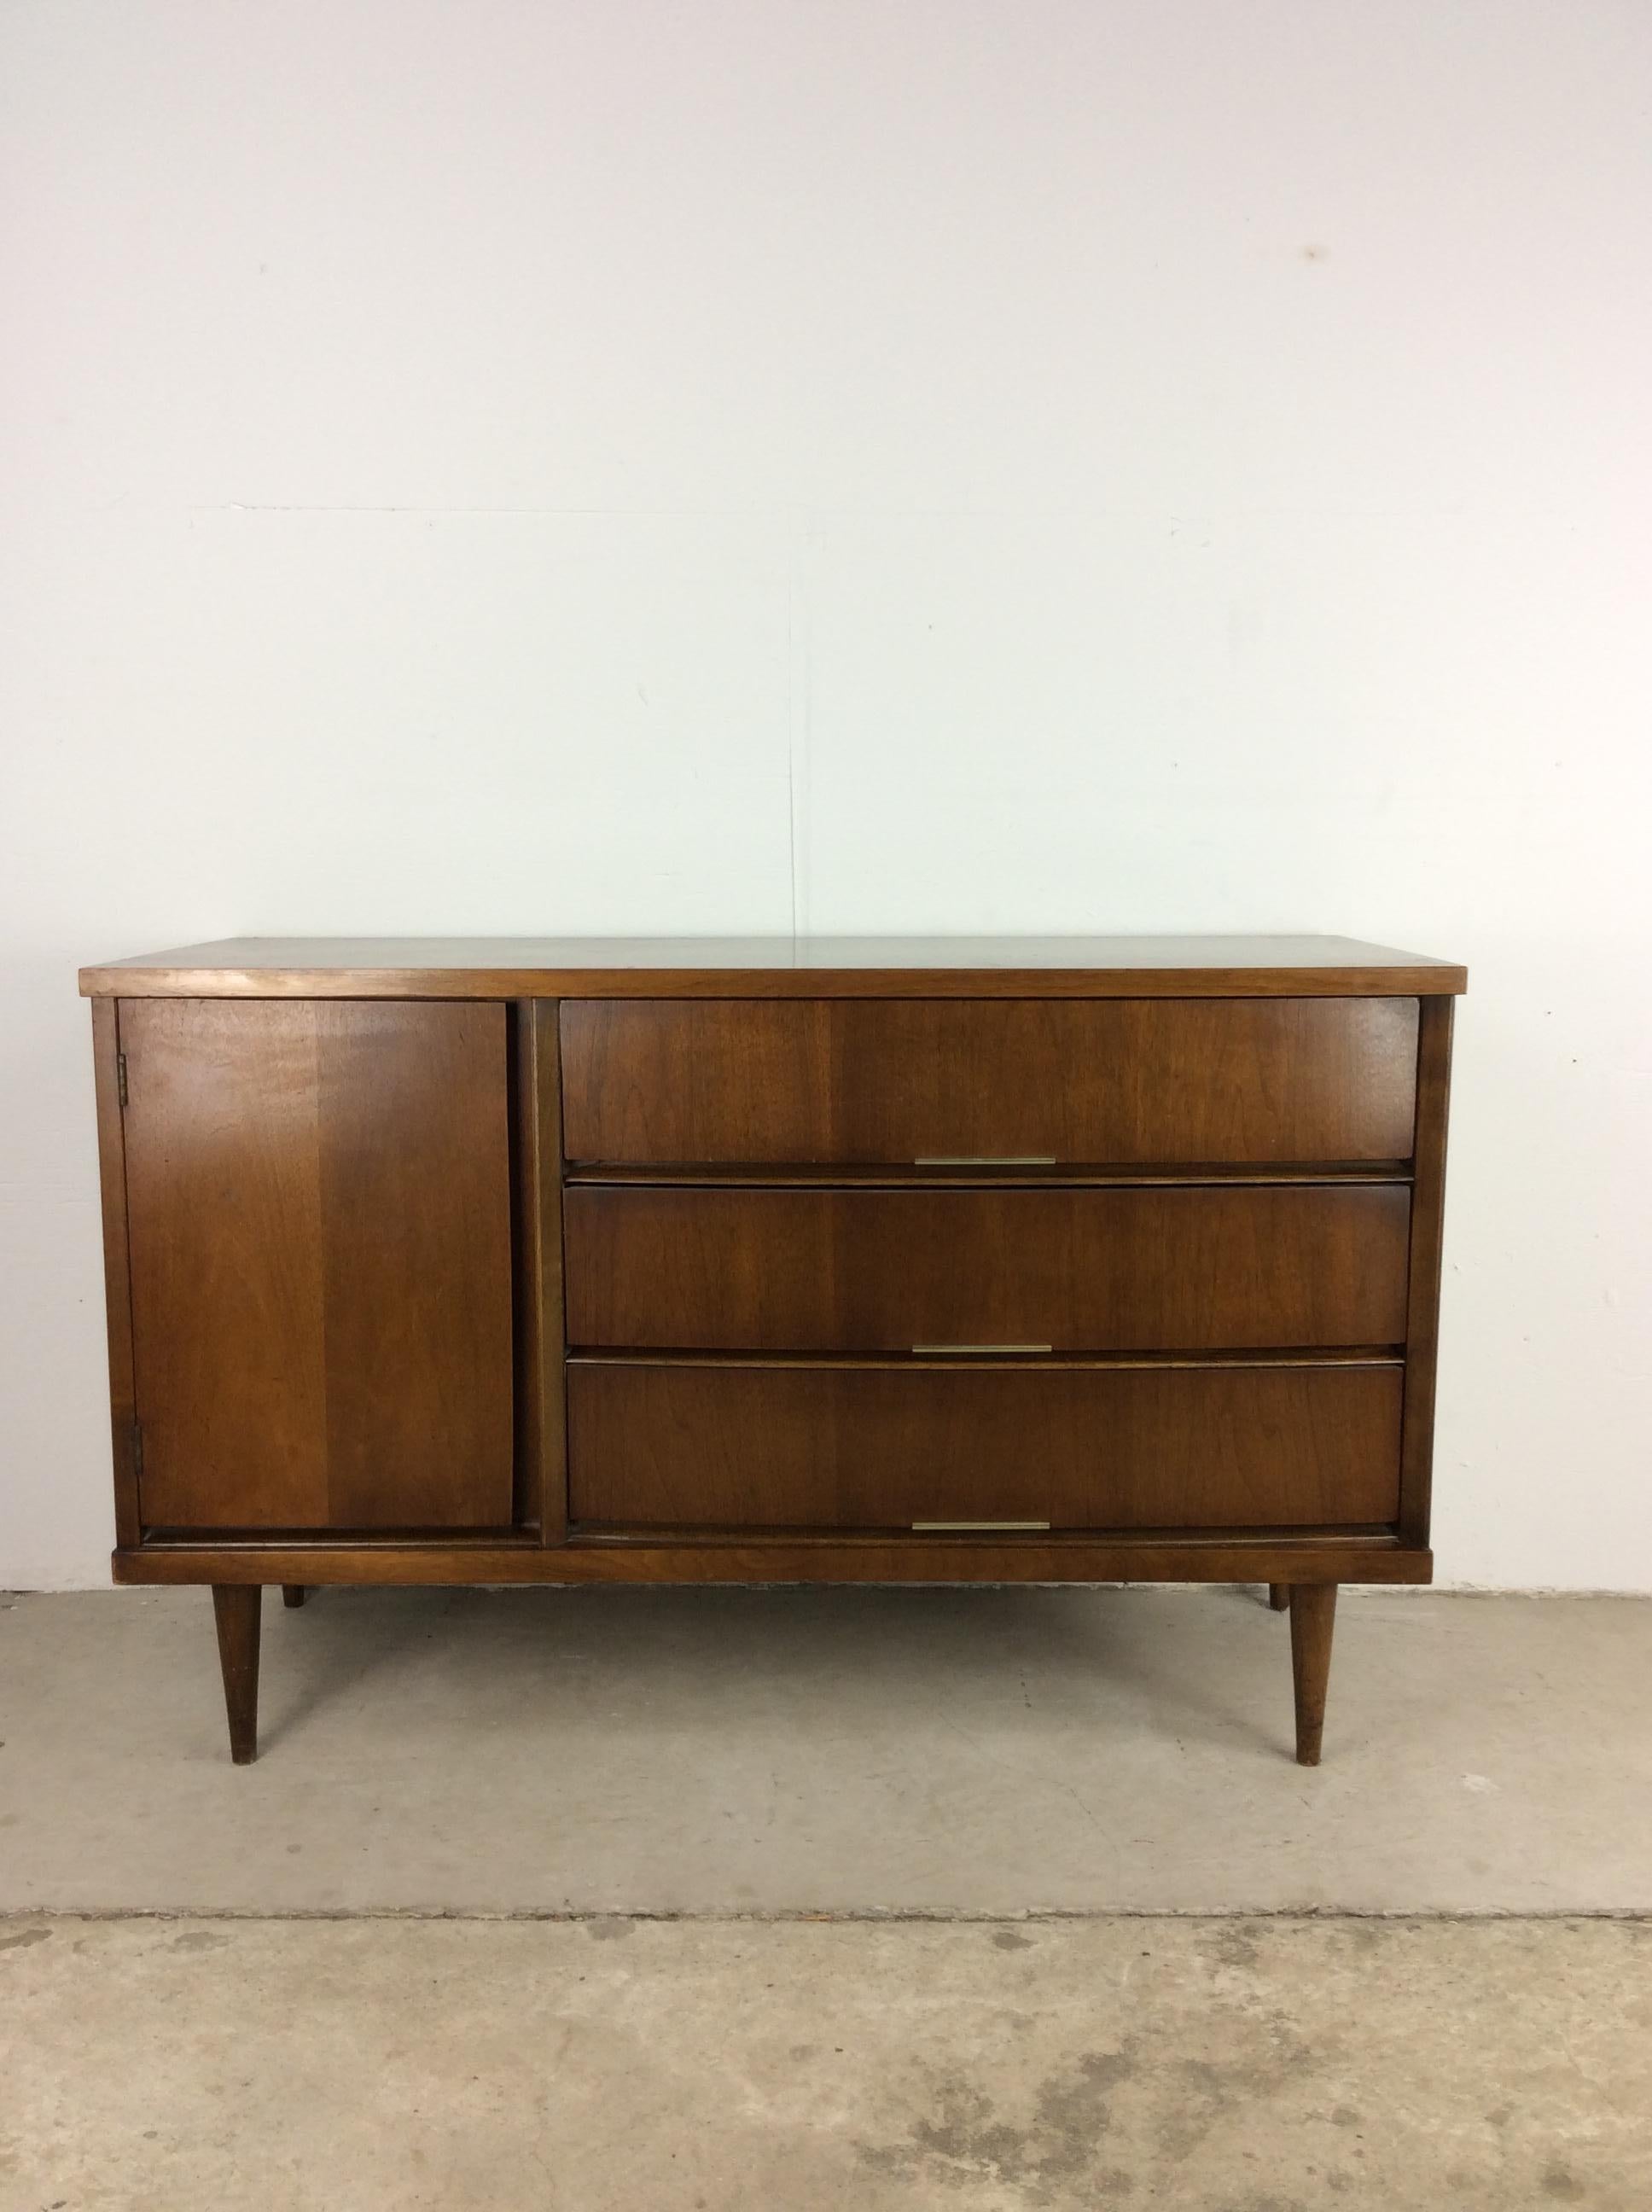 his Mid-Century Modern credenza by Bassett Furniture features hardwood construction, original walnut finish, three dovetailed drawers with inlaid brass accented hardware, one cabinet with single shelf, and tall tapered legs. 

Dimensions: 48w